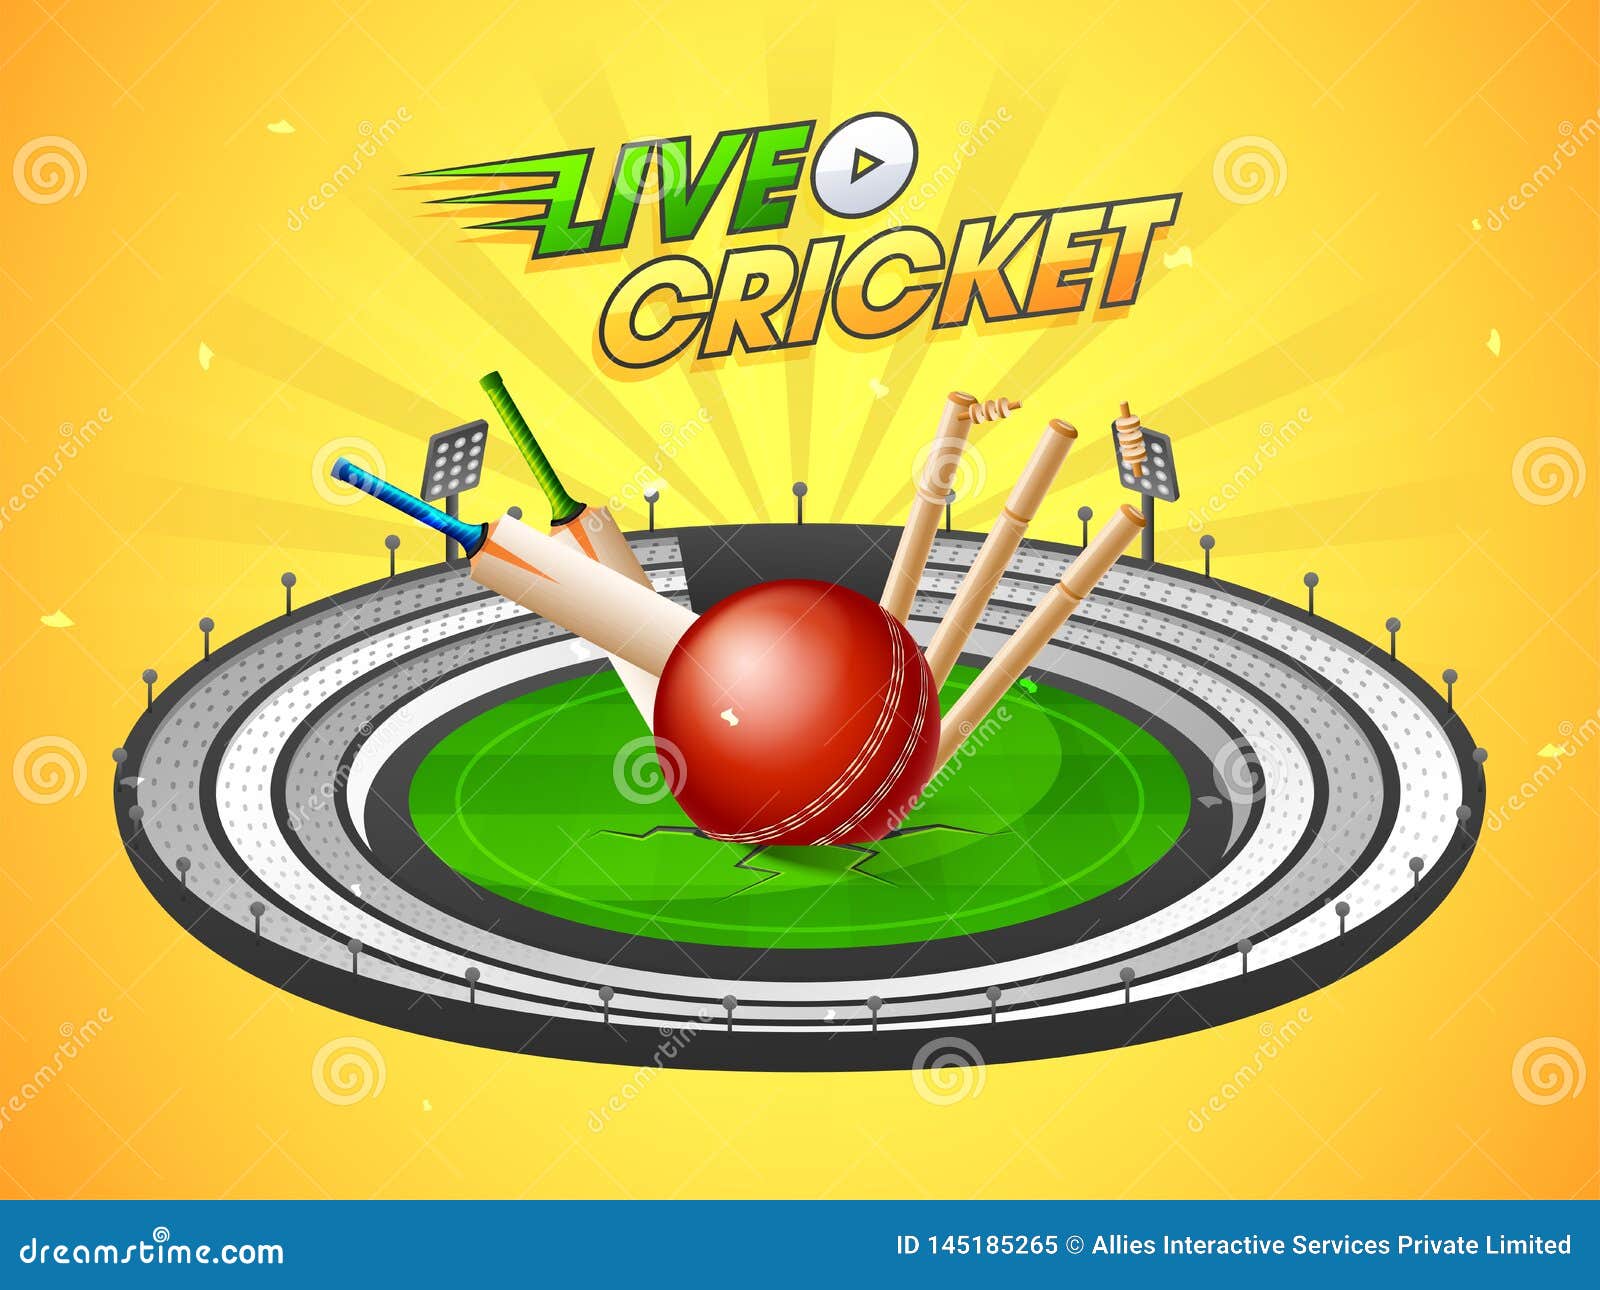 Live Cricket Match Banner or Poster Design with Cricket Equipments